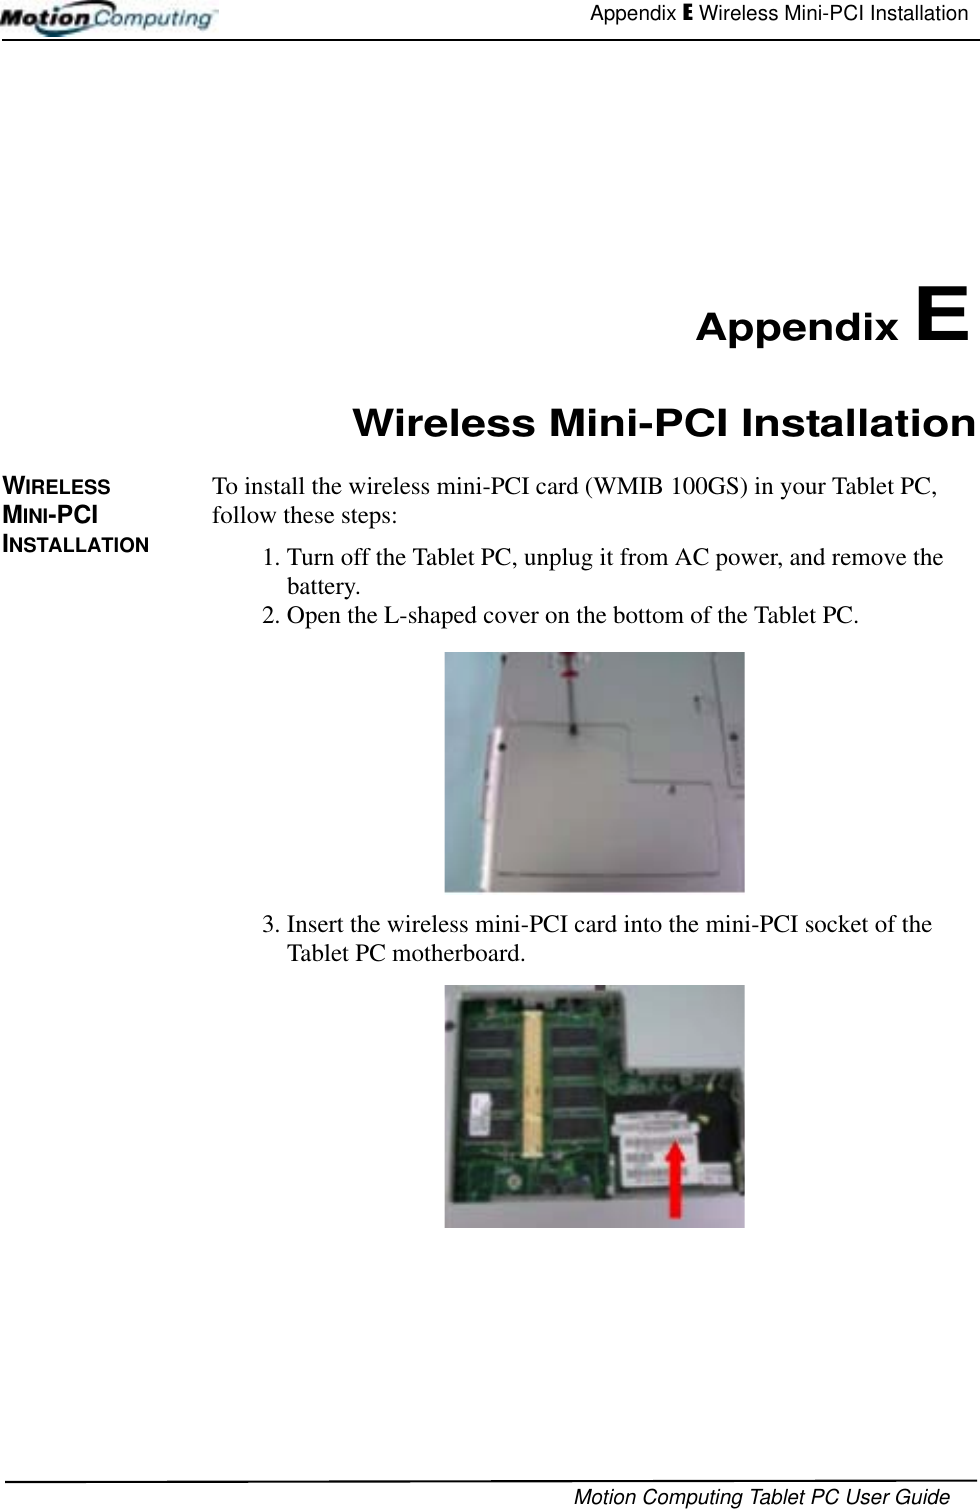 Appendix E Wireless Mini-PCI InstallationMotion Computing Tablet PC User Guide Appendix EWireless Mini-PCI InstallationWIRELESS MINI-PCI INSTALLATIONTo install the wireless mini-PCI card (WMIB 100GS) in your Tablet PC, follow these steps: 1. Turn off the Tablet PC, unplug it from AC power, and remove the battery.2. Open the L-shaped cover on the bottom of the Tablet PC. 3. Insert the wireless mini-PCI card into the mini-PCI socket of the Tablet PC motherboard.